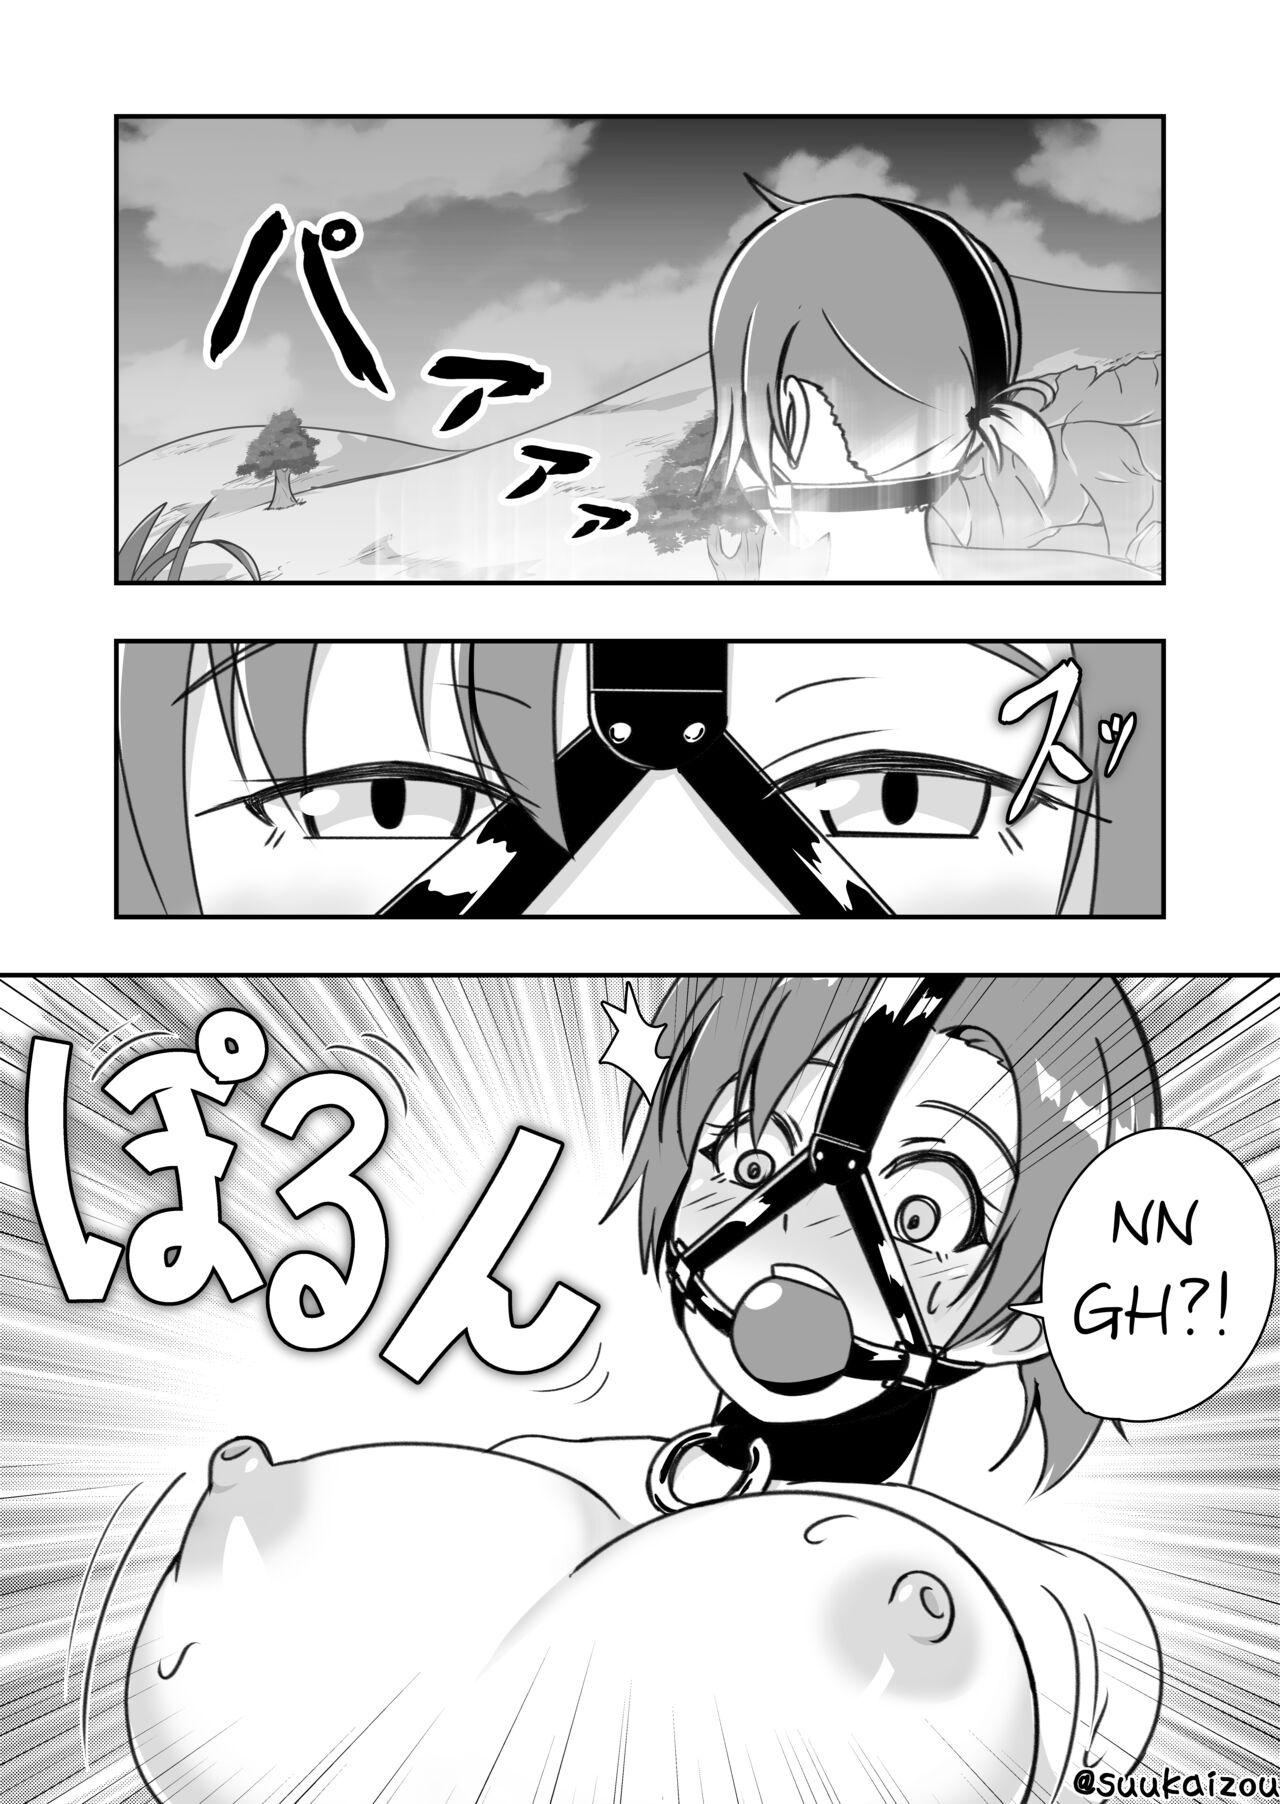 Boudica is trained by Shota (Fate Grand Order) Bahasa Indonesia